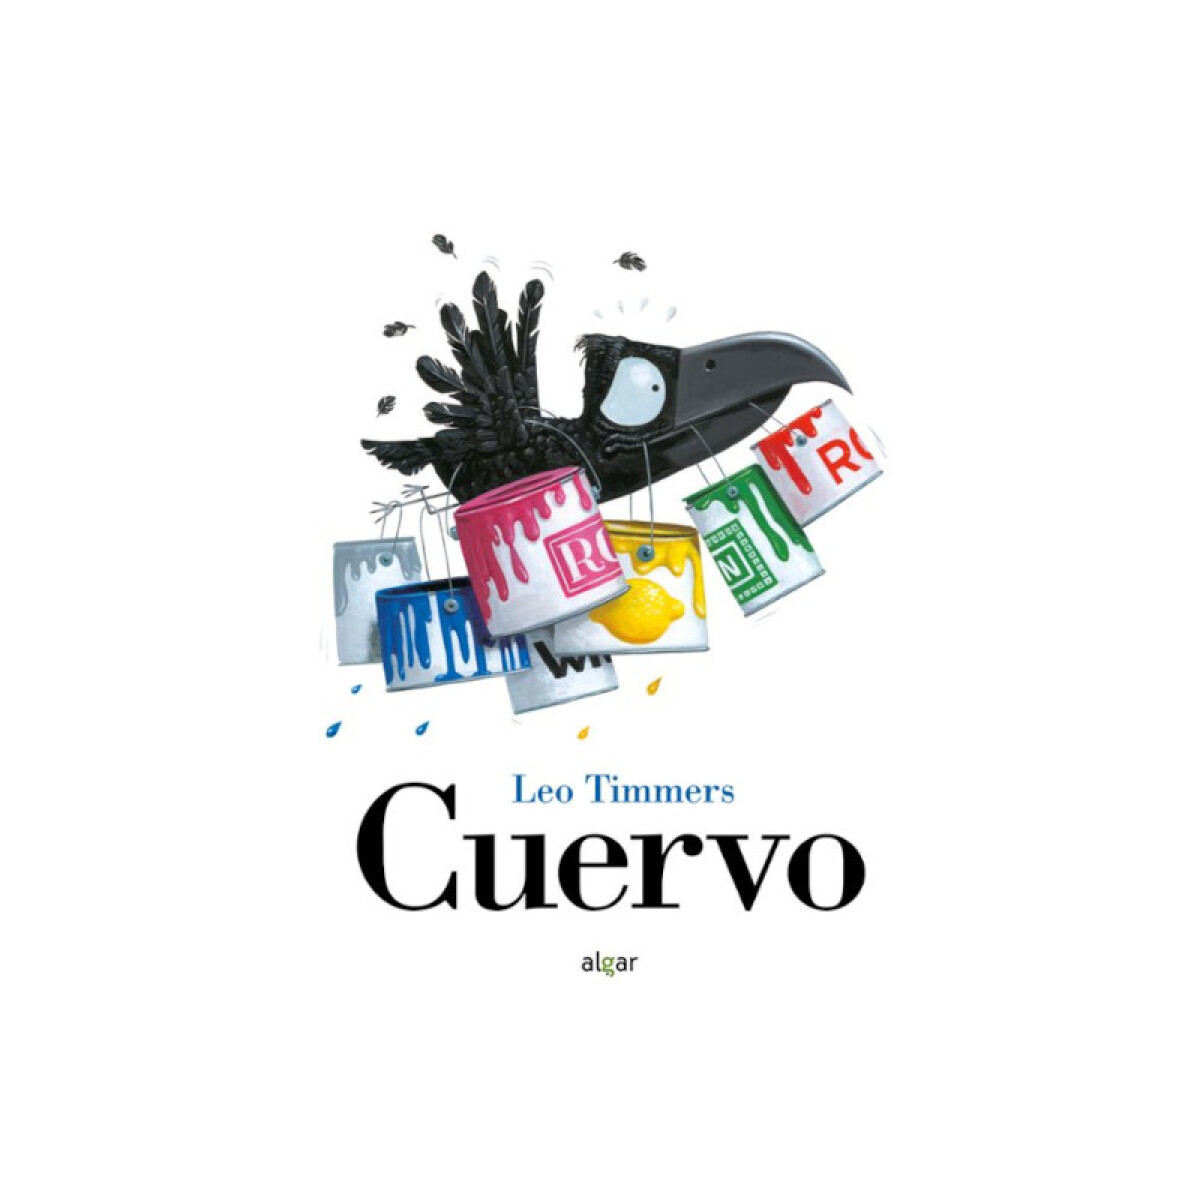 Cuervo - Leo Timmers 